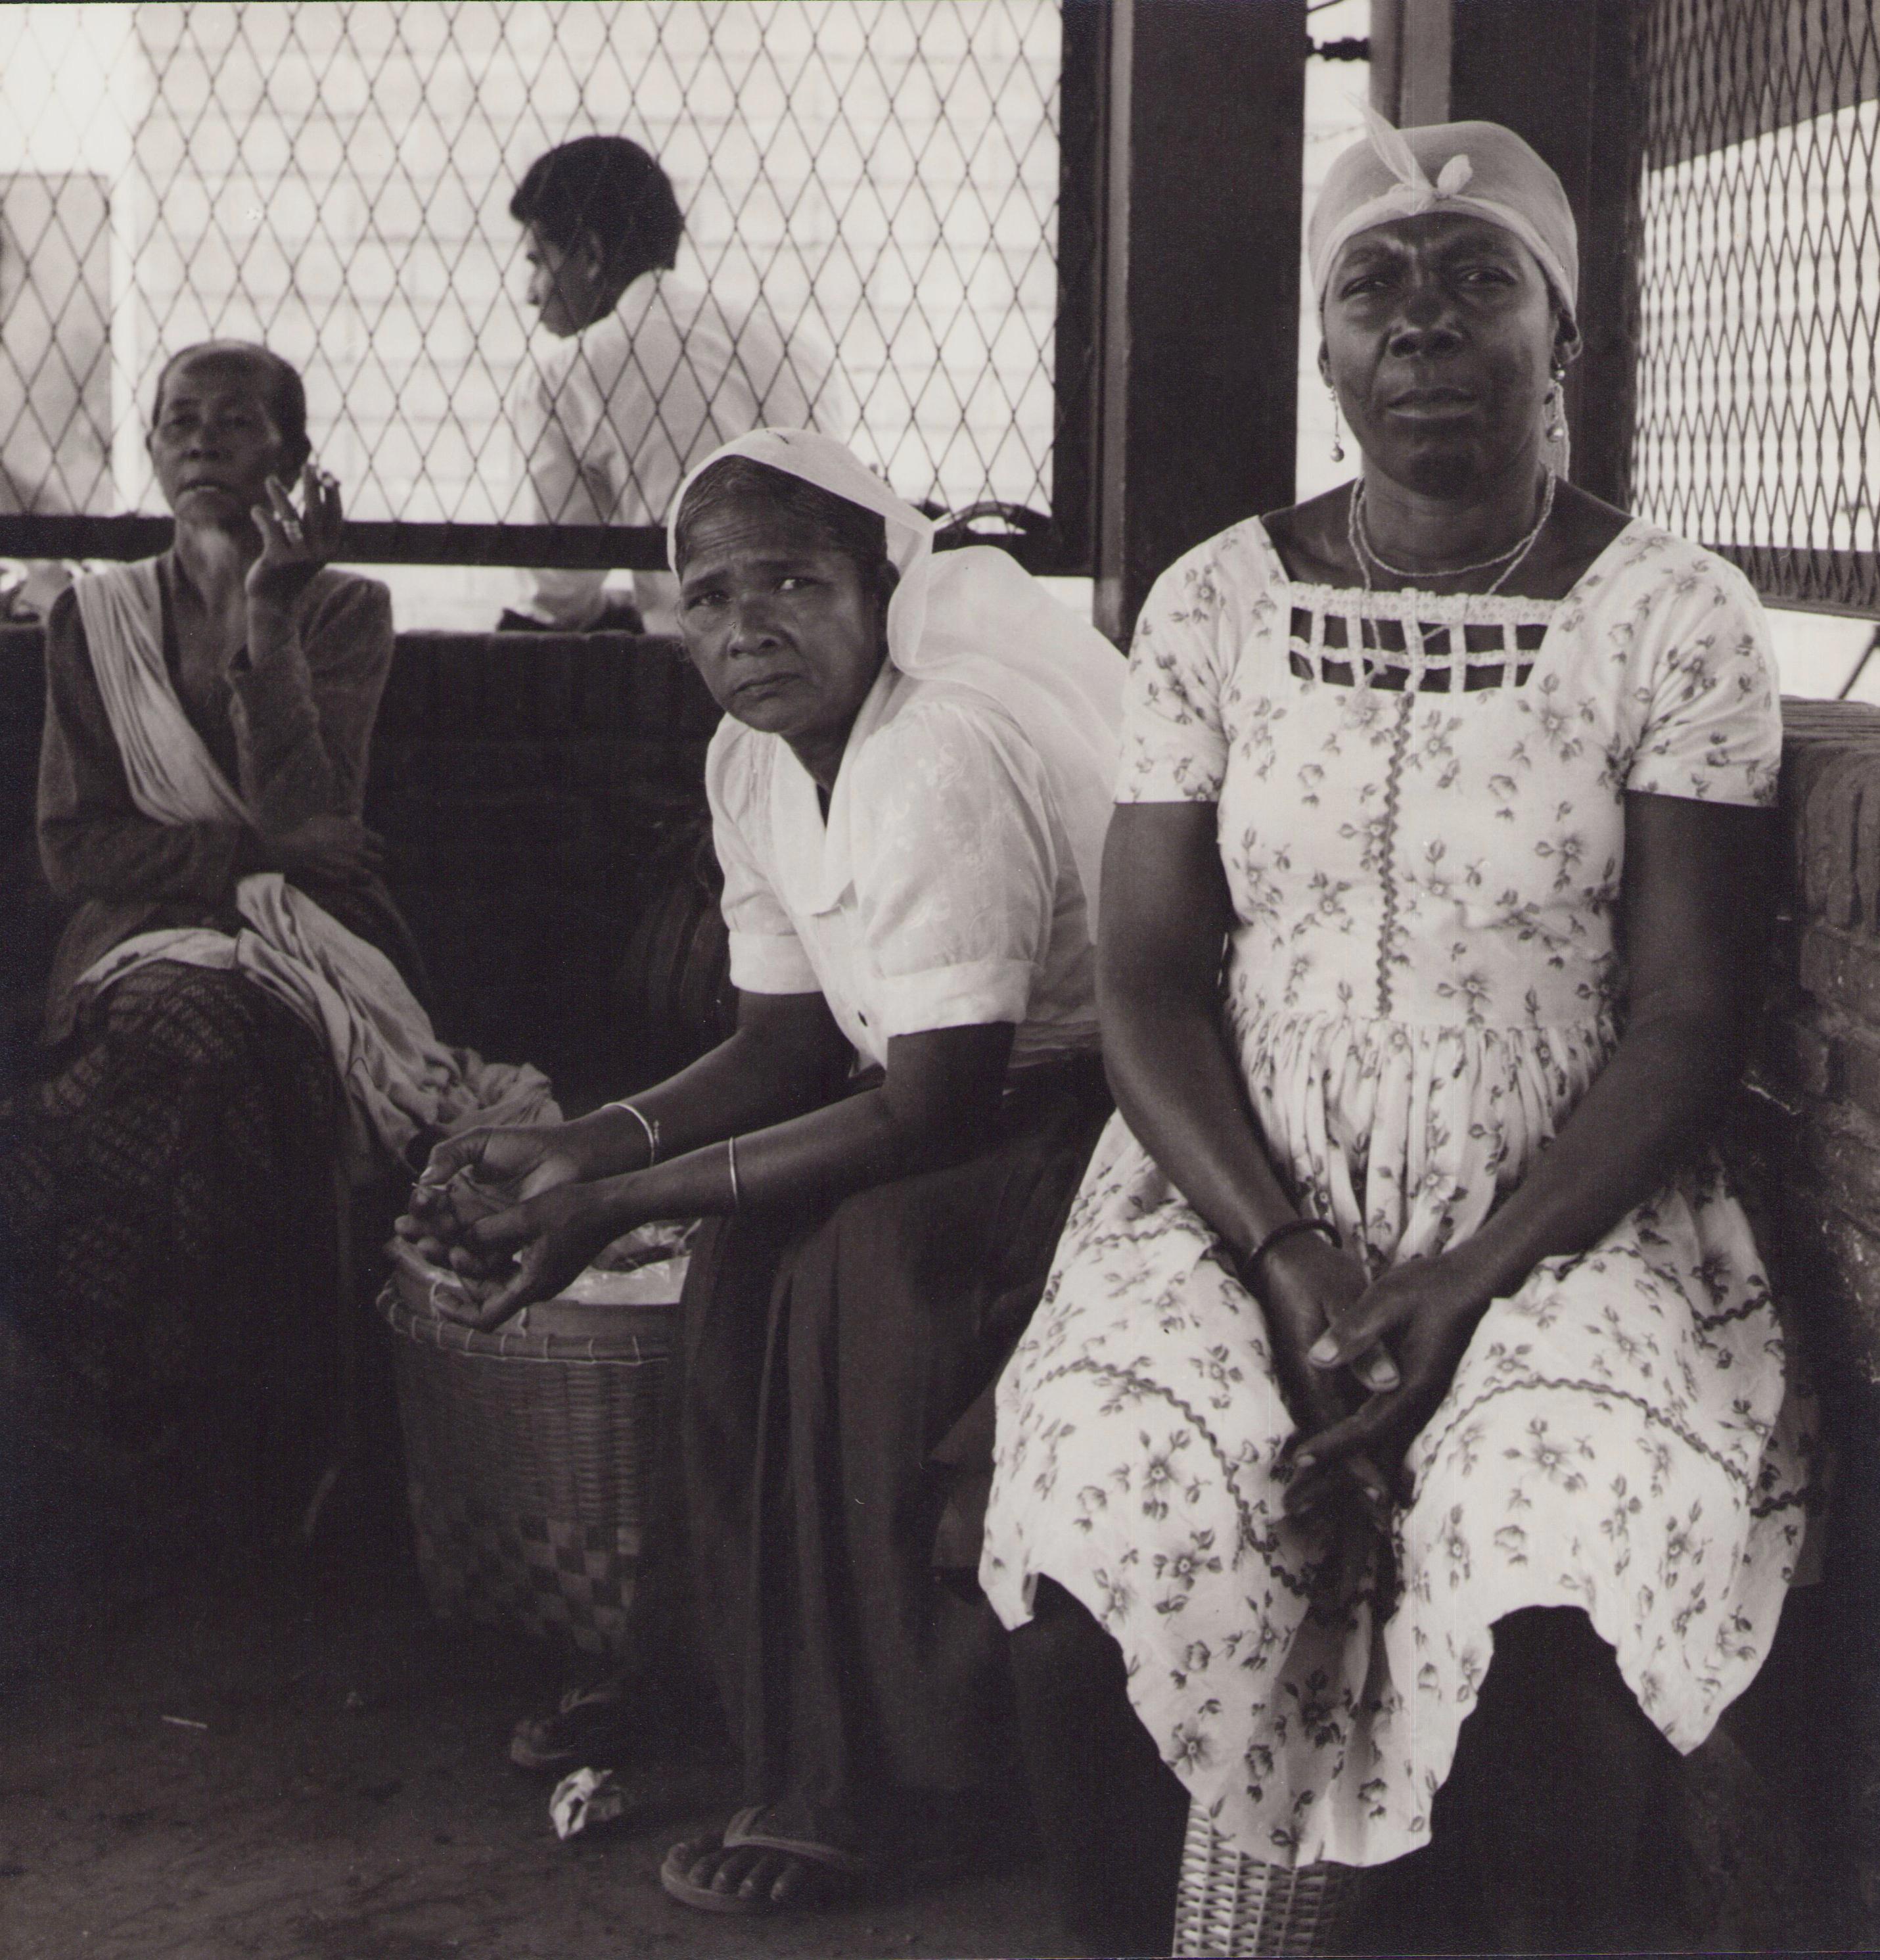 Suriname, Woman, Black and White Photography, 1960s, 25, 1 x 24, 4 cm